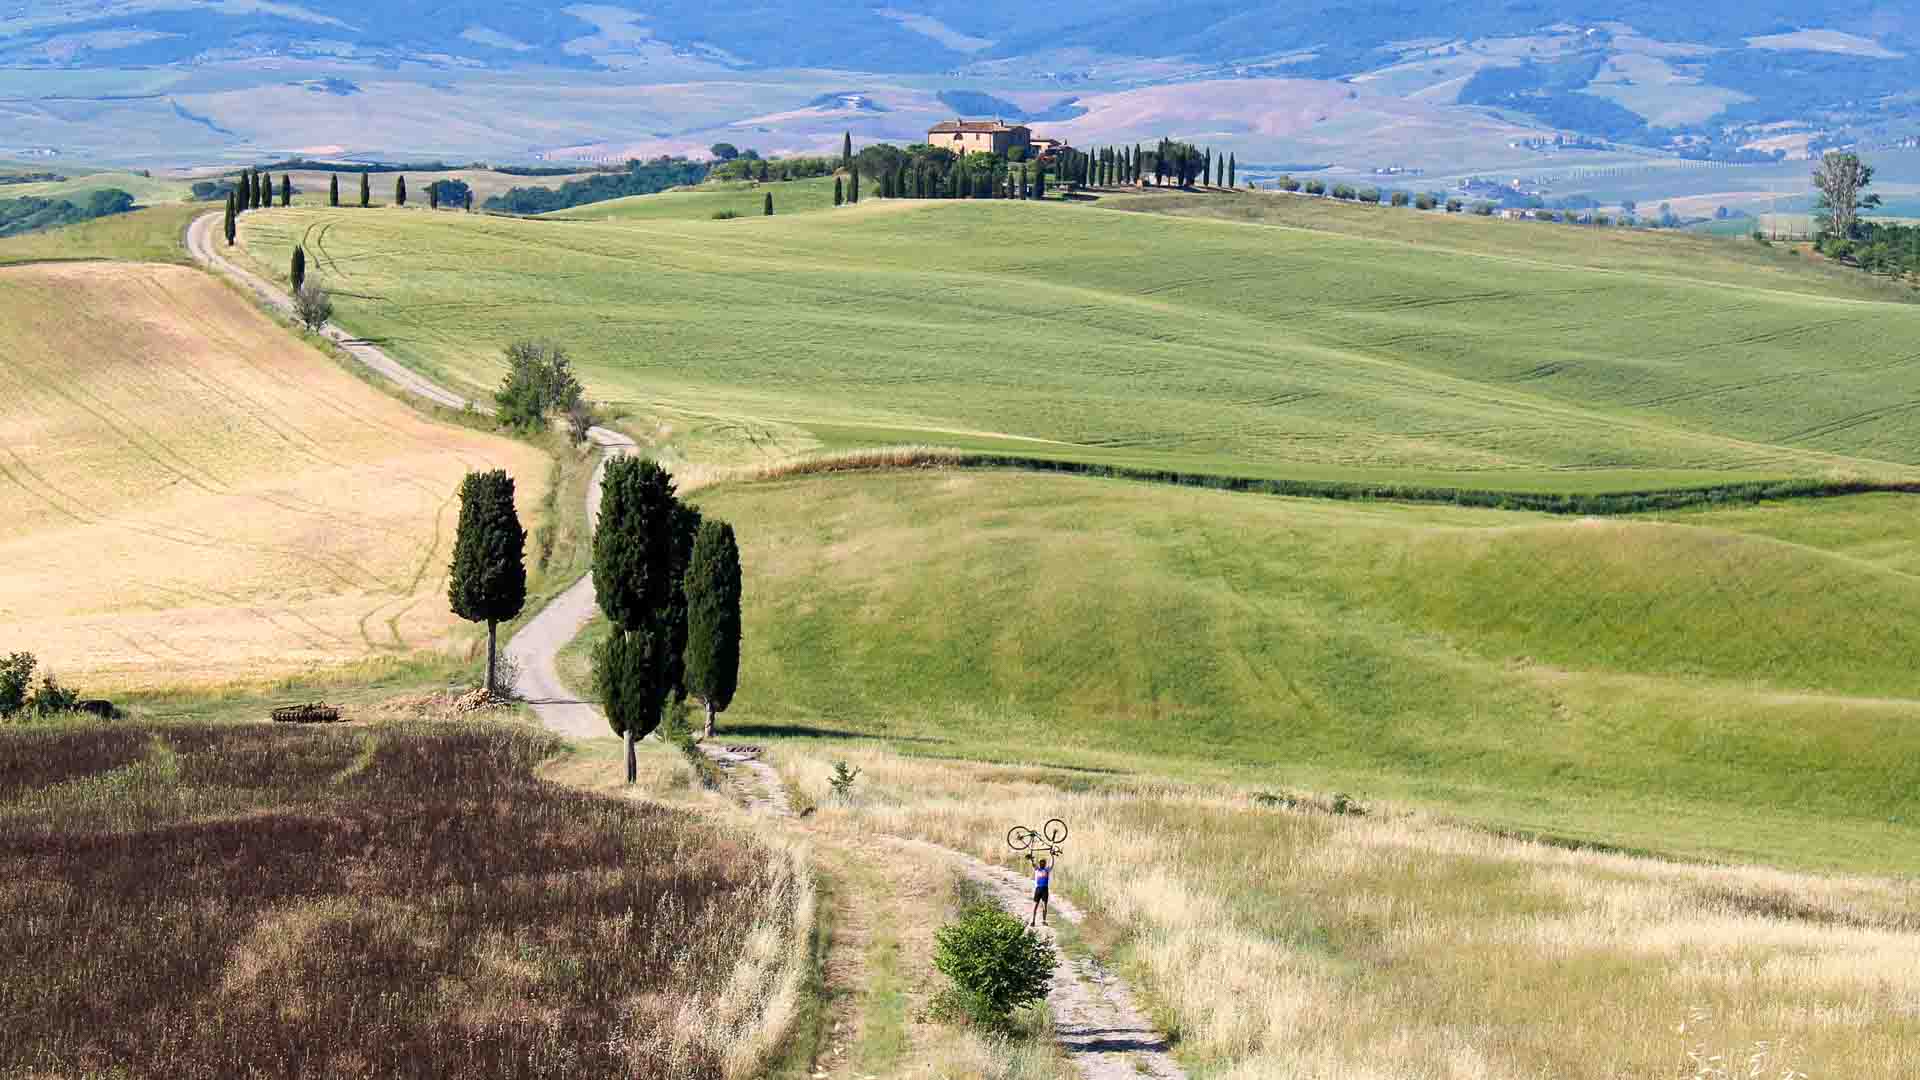 Cyclists riding in rolling hills of Tuscany